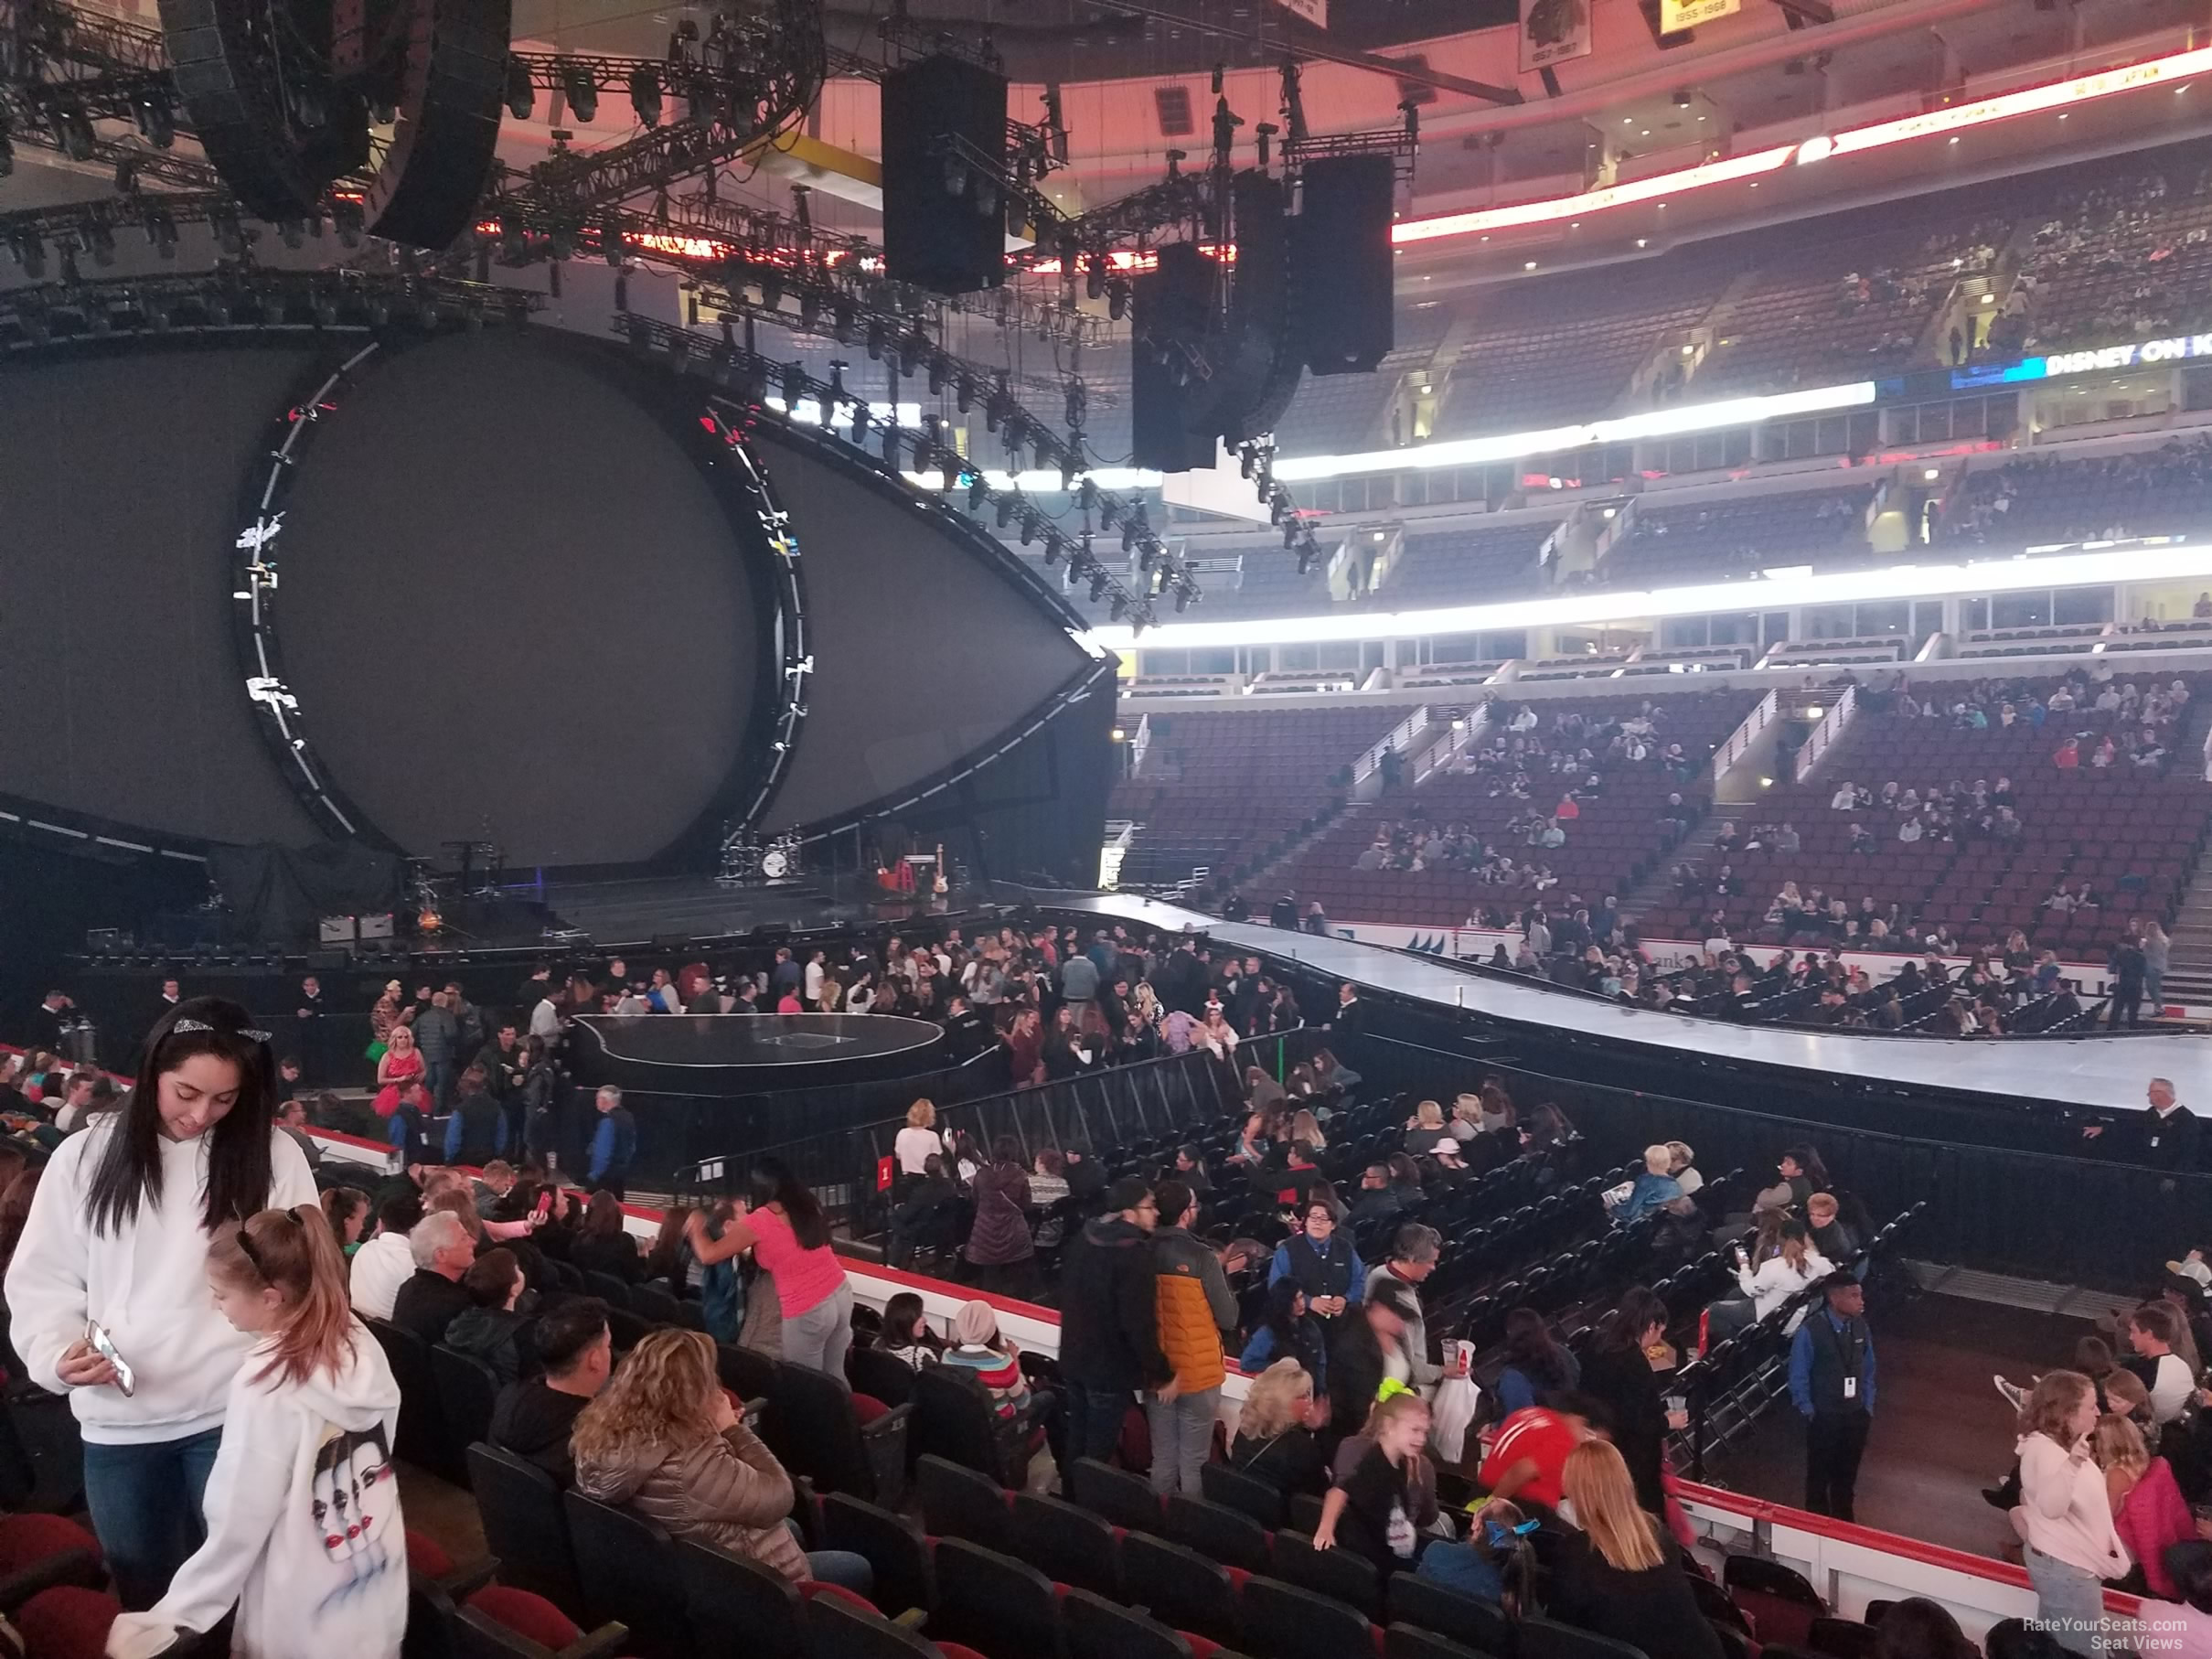 section 111, row 12 seat view  for concert - united center